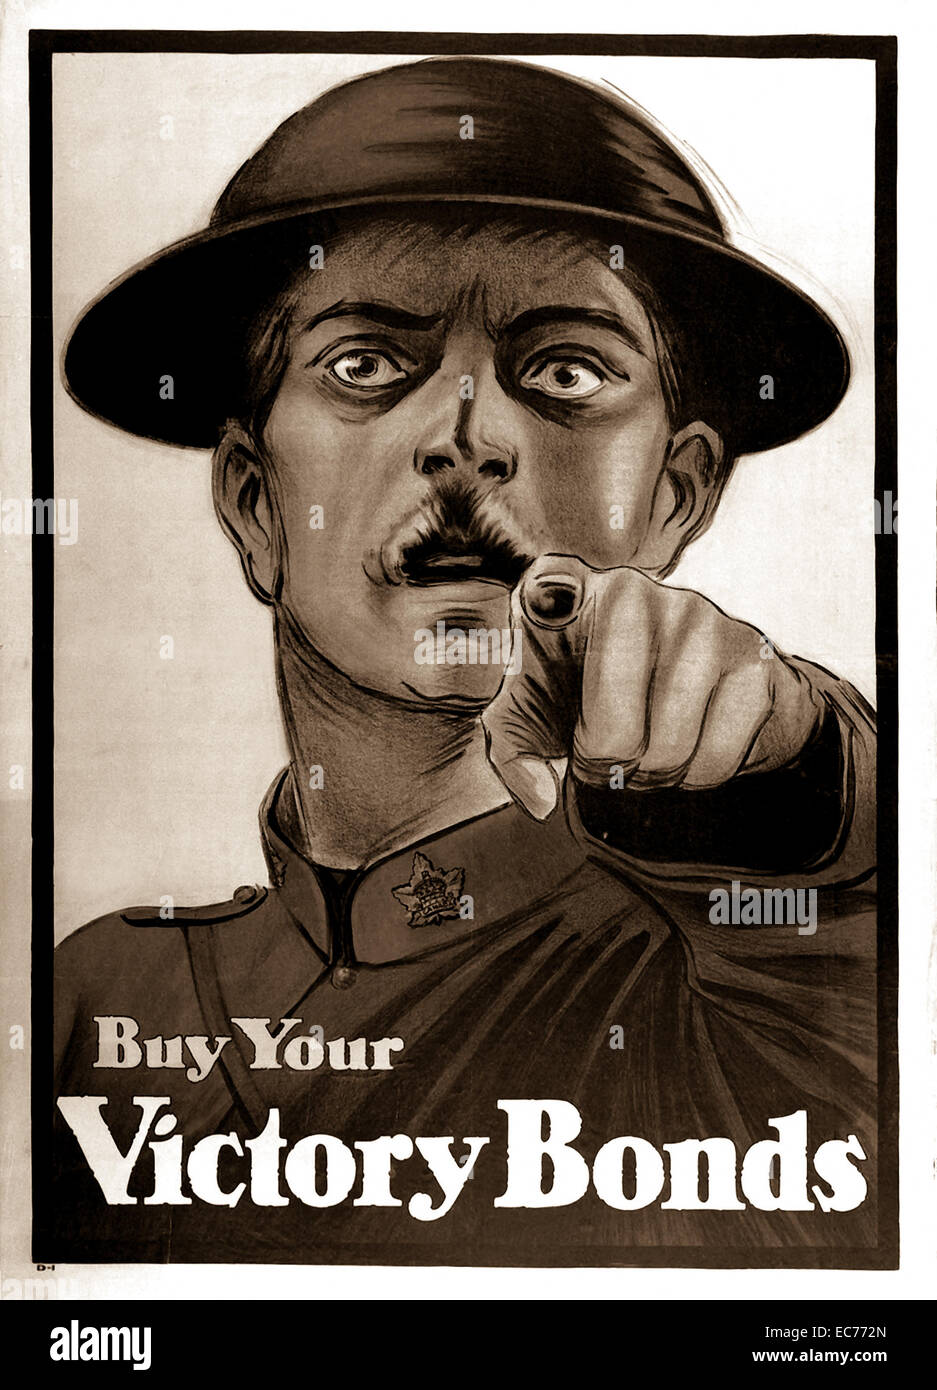 Buy Your Victory Bonds.  Ca.  1917.  Poster.  Issued by the Victory Bond Committee, Ottawa, Canada. Stock Photo